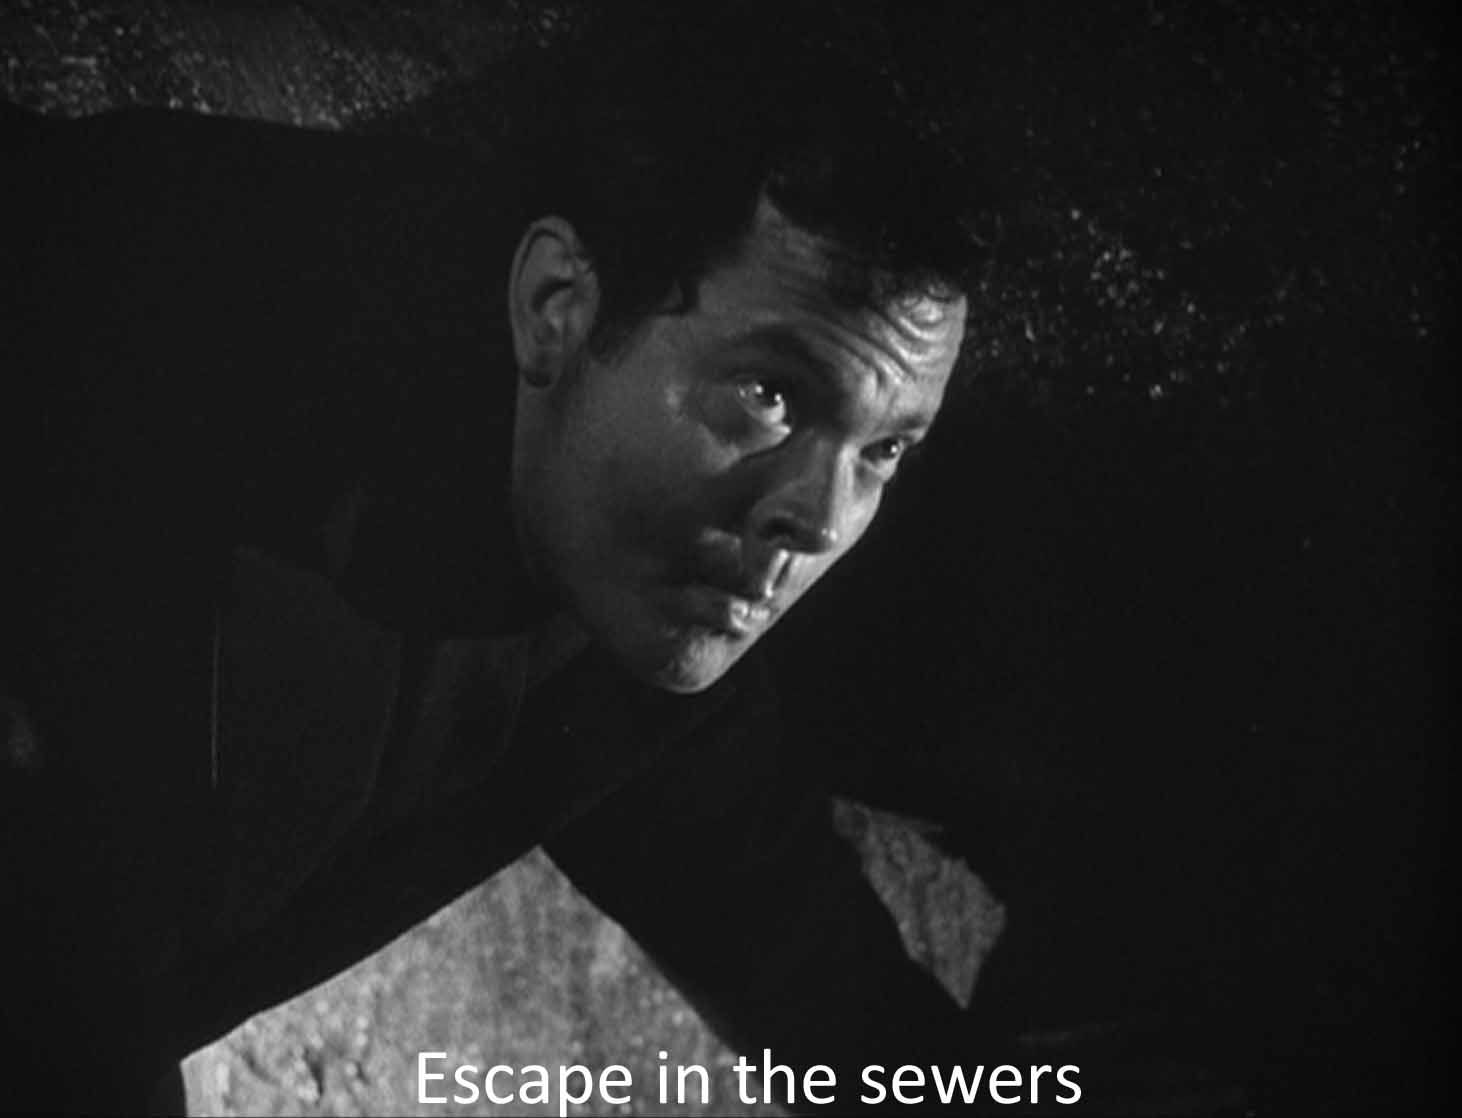 Escape in the sewers